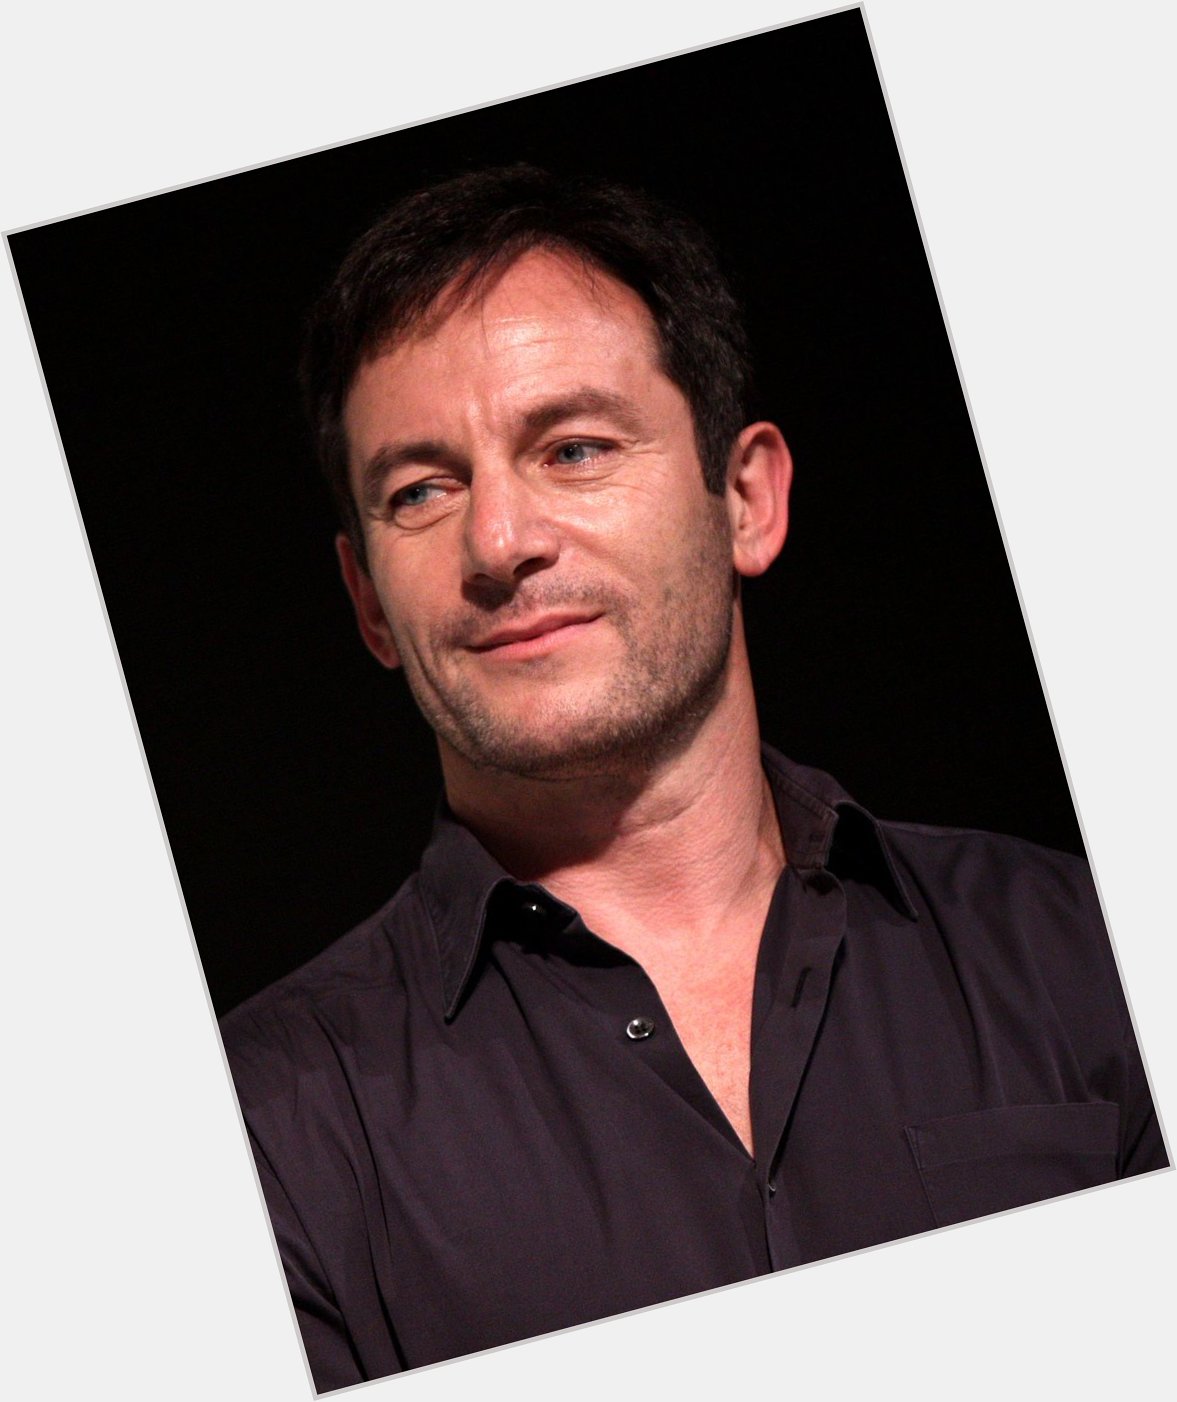 Happy 54th birthday to Jason Isaacs! He played Lucius Malfoy in the Harry Potter series! 